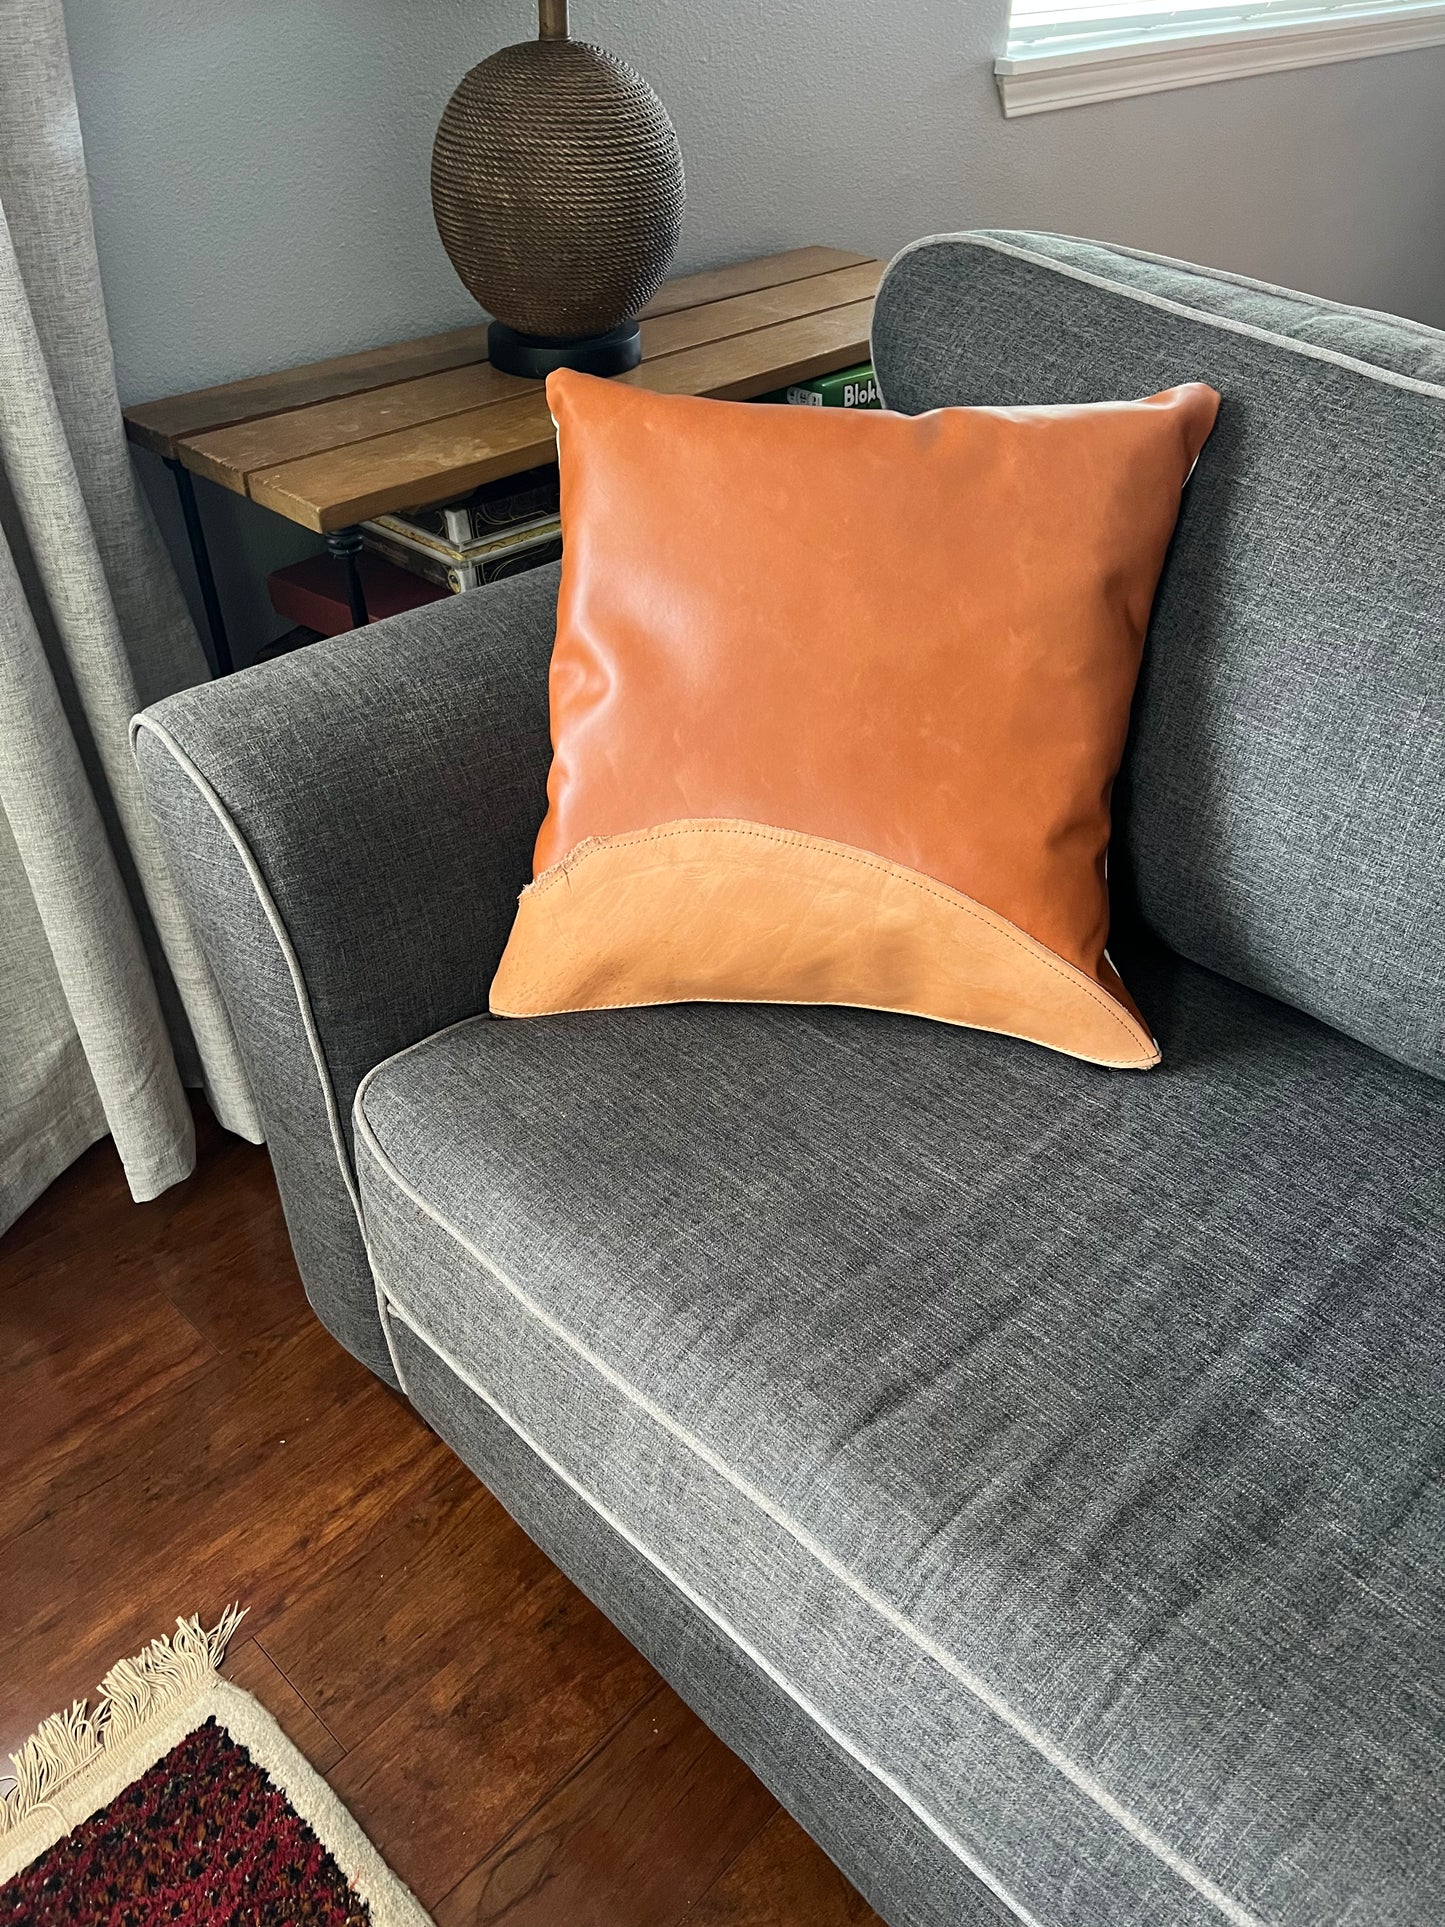 Leather Pillow Cover | Couch Pillow Cover | Decorative Leather Pillow Covers | Leather Home Accents